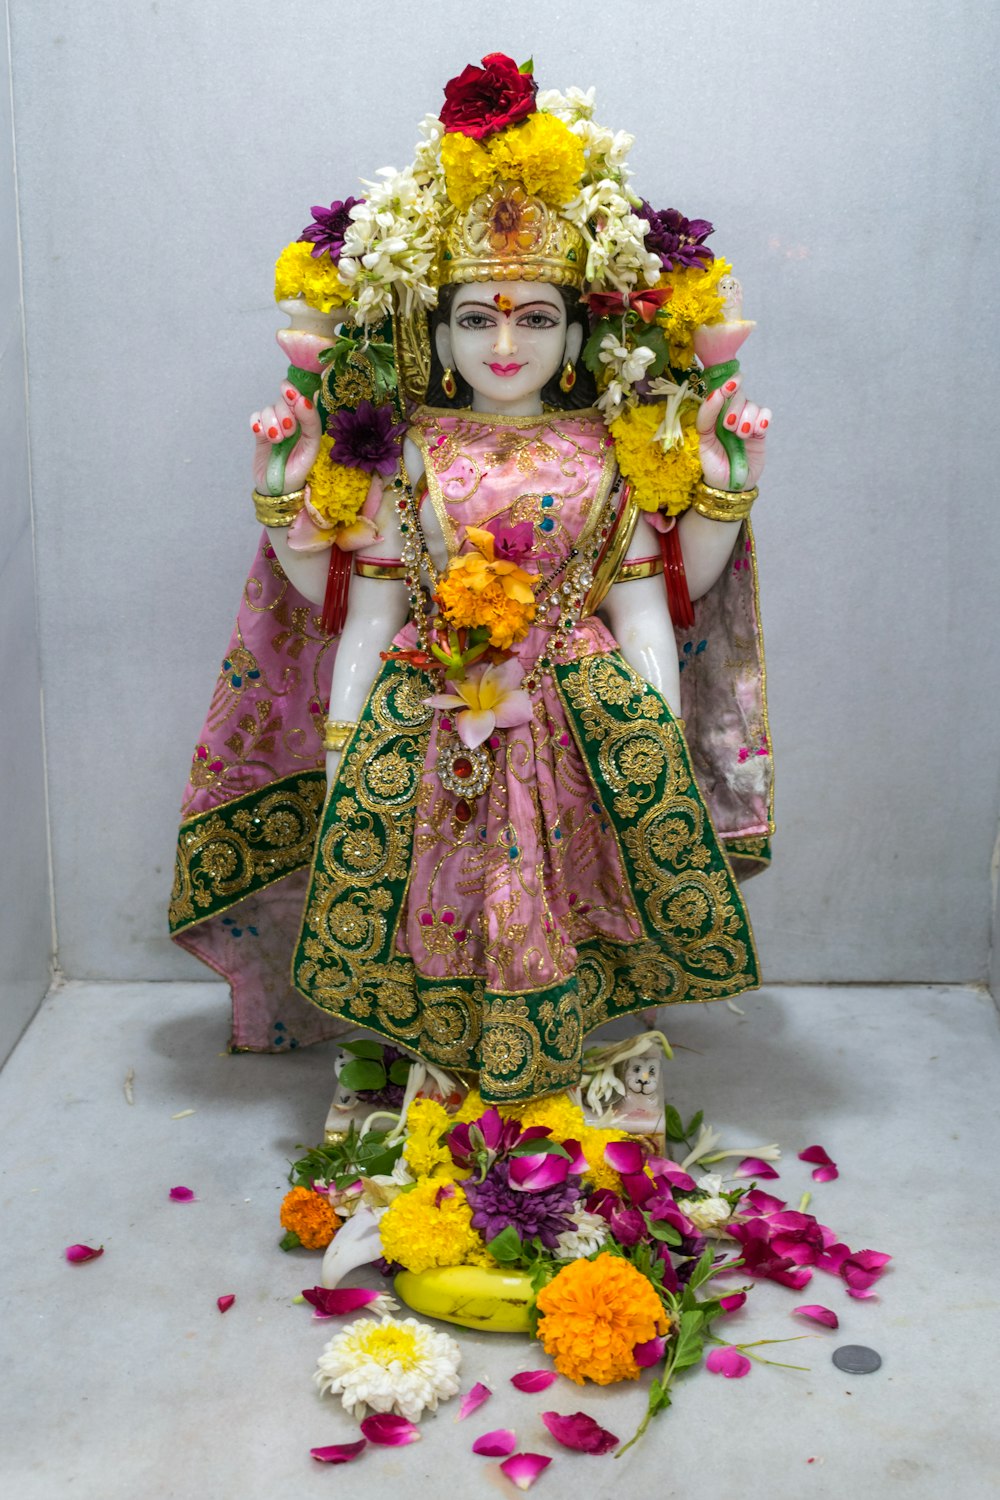 a statue of a woman with flowers around her